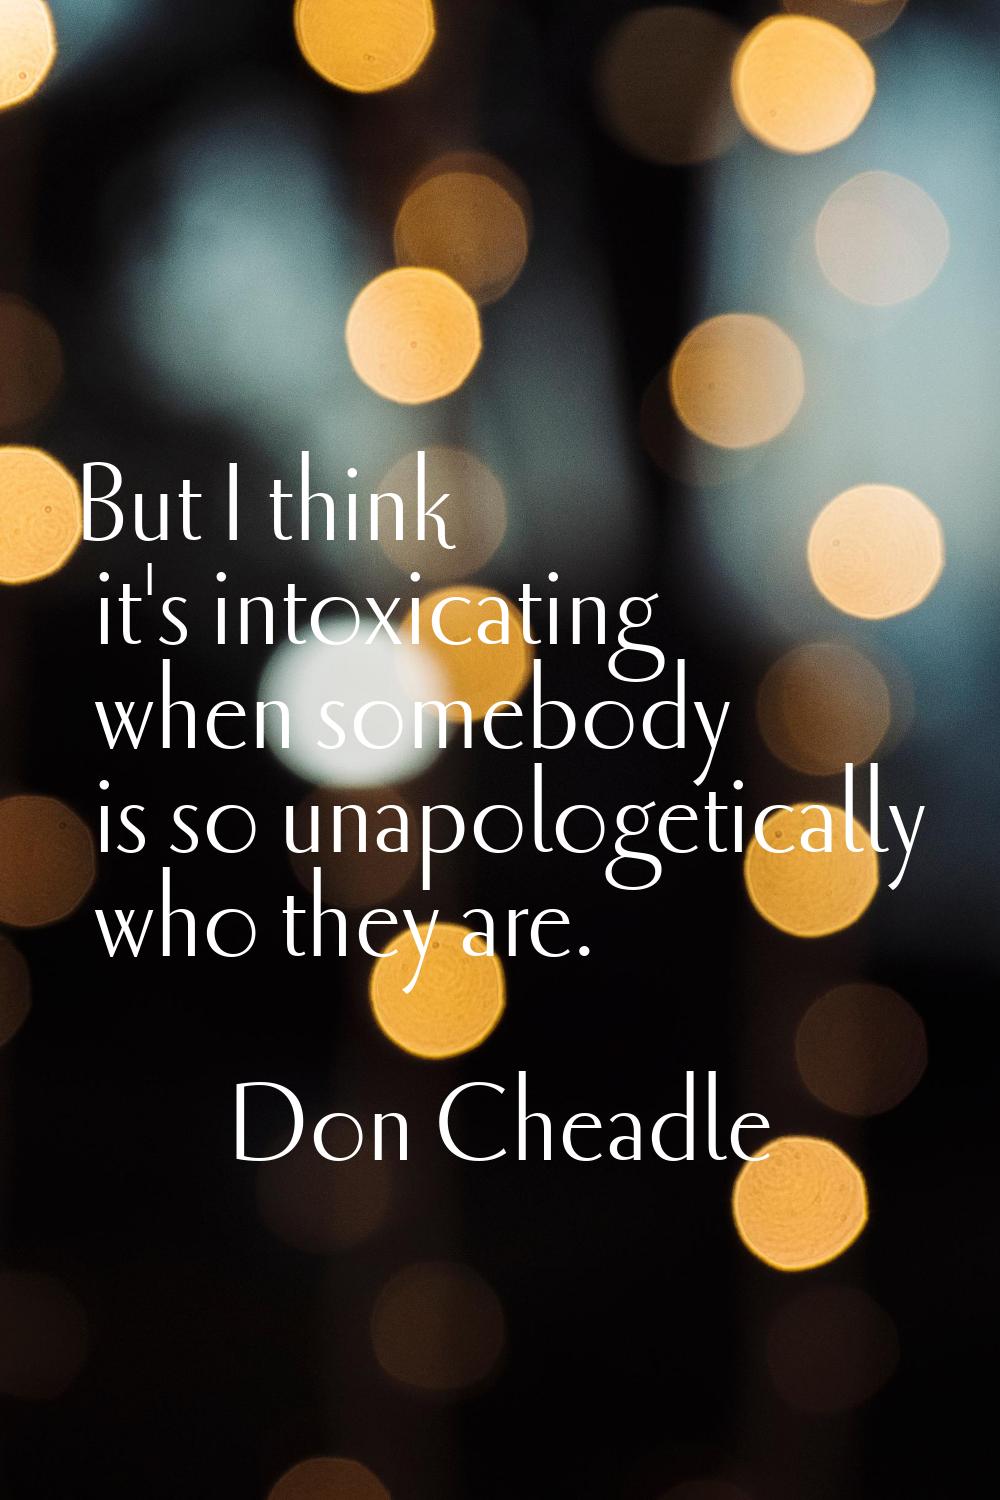 But I think it's intoxicating when somebody is so unapologetically who they are.